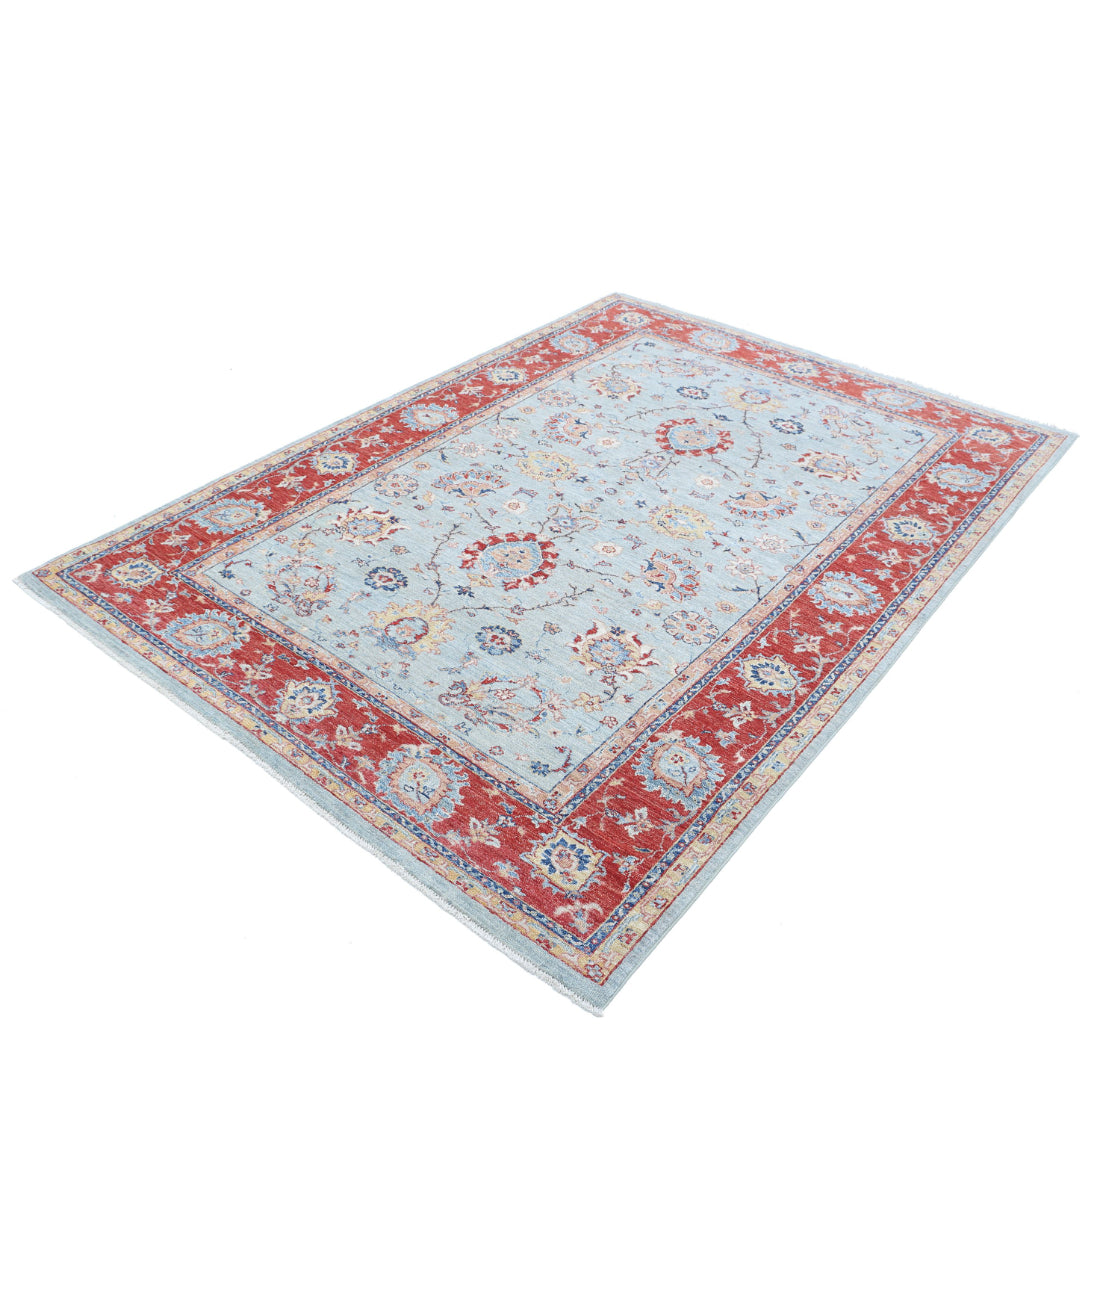 Ziegler 5'6'' X 7'9'' Hand-Knotted Wool Rug 5'6'' x 7'9'' (165 X 233) / Blue / Red